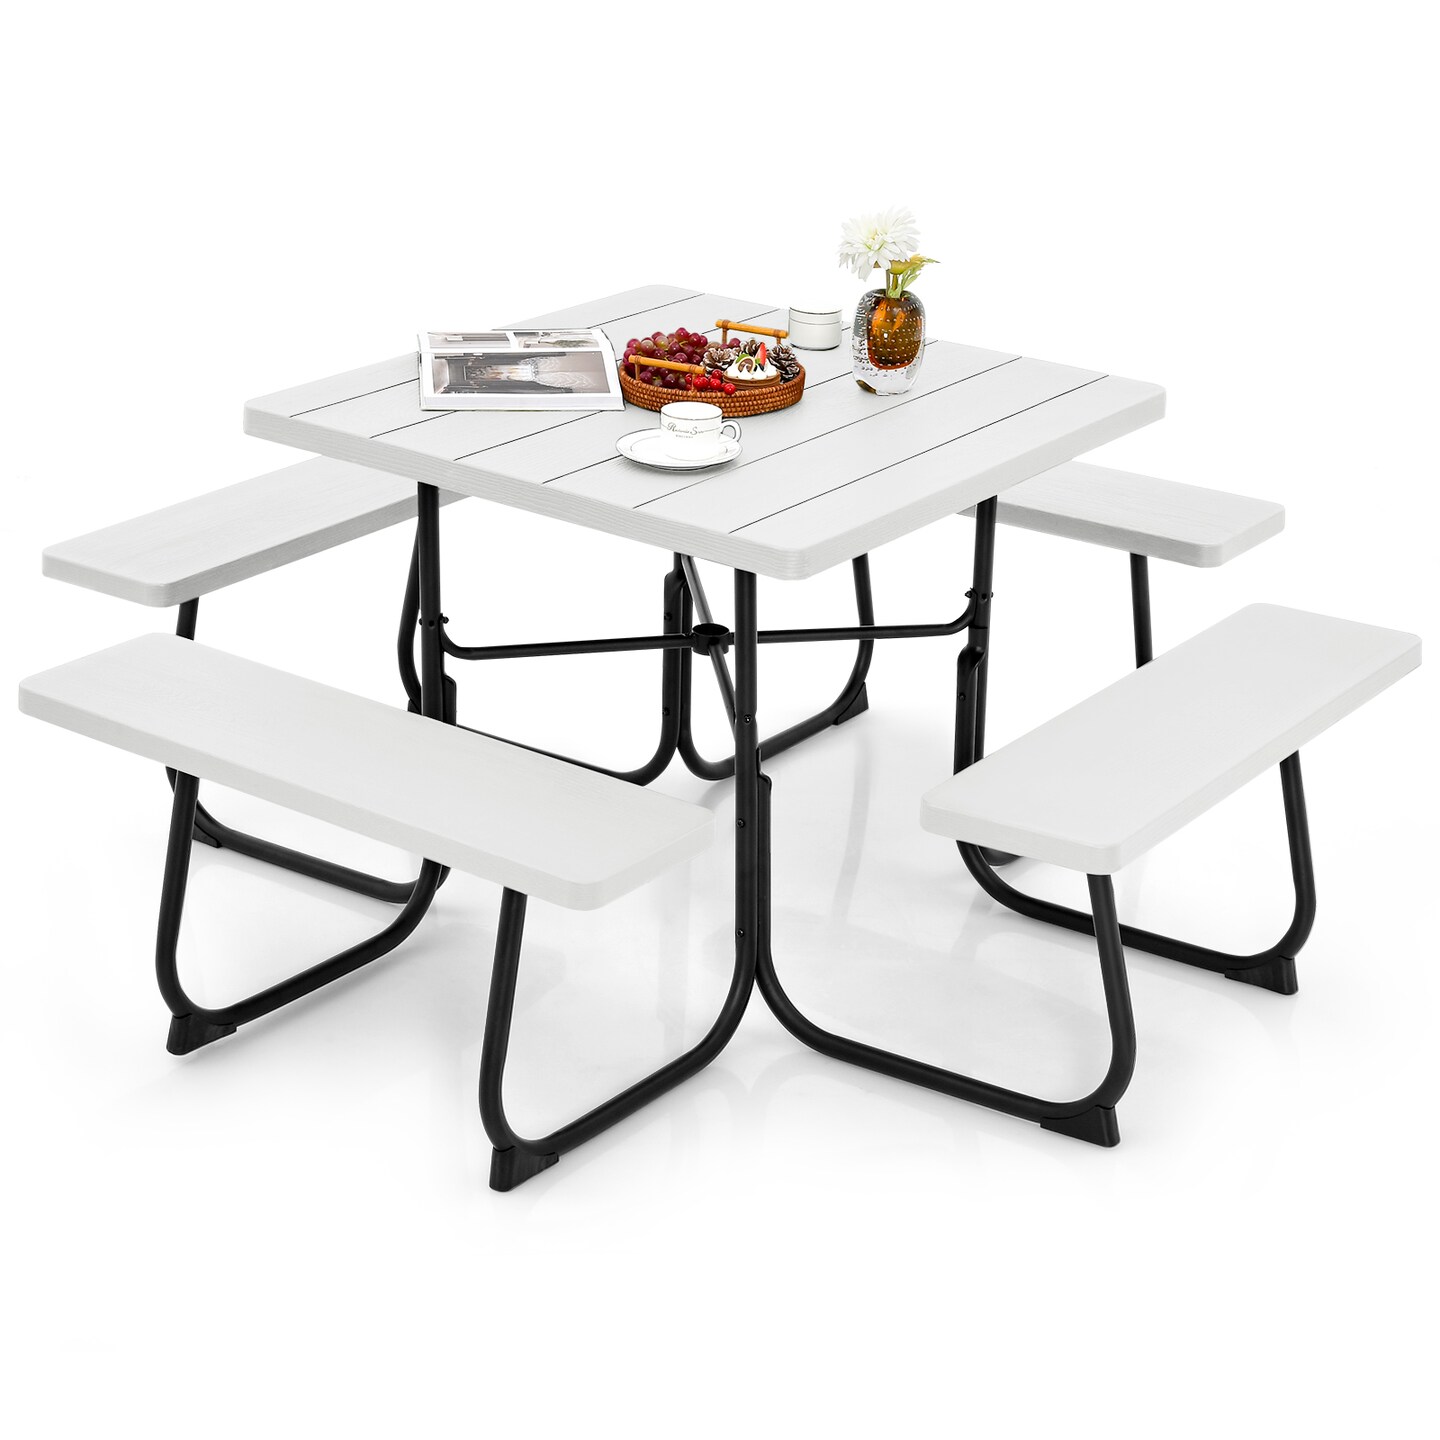 Outdoor Picnic Table With 4 Benches And Umbrella Hole